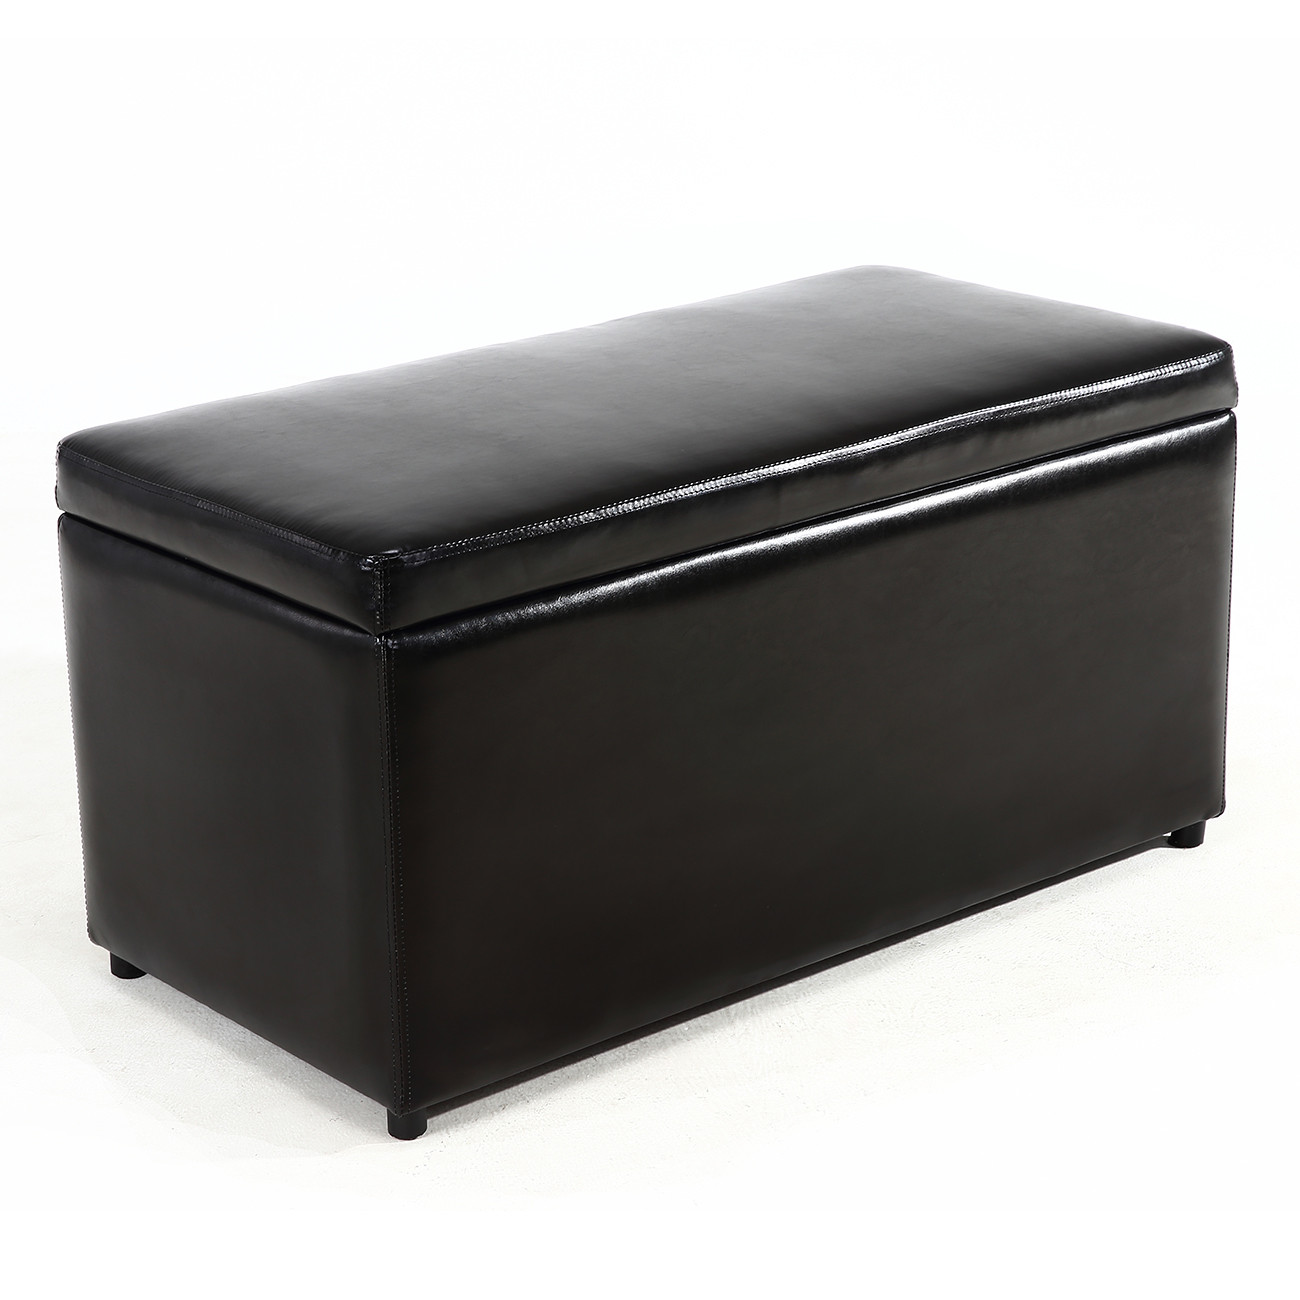 Storage Bench With Tray
 3PC Ottoman Bench Storage Lid Tray Footrest Coffee Table